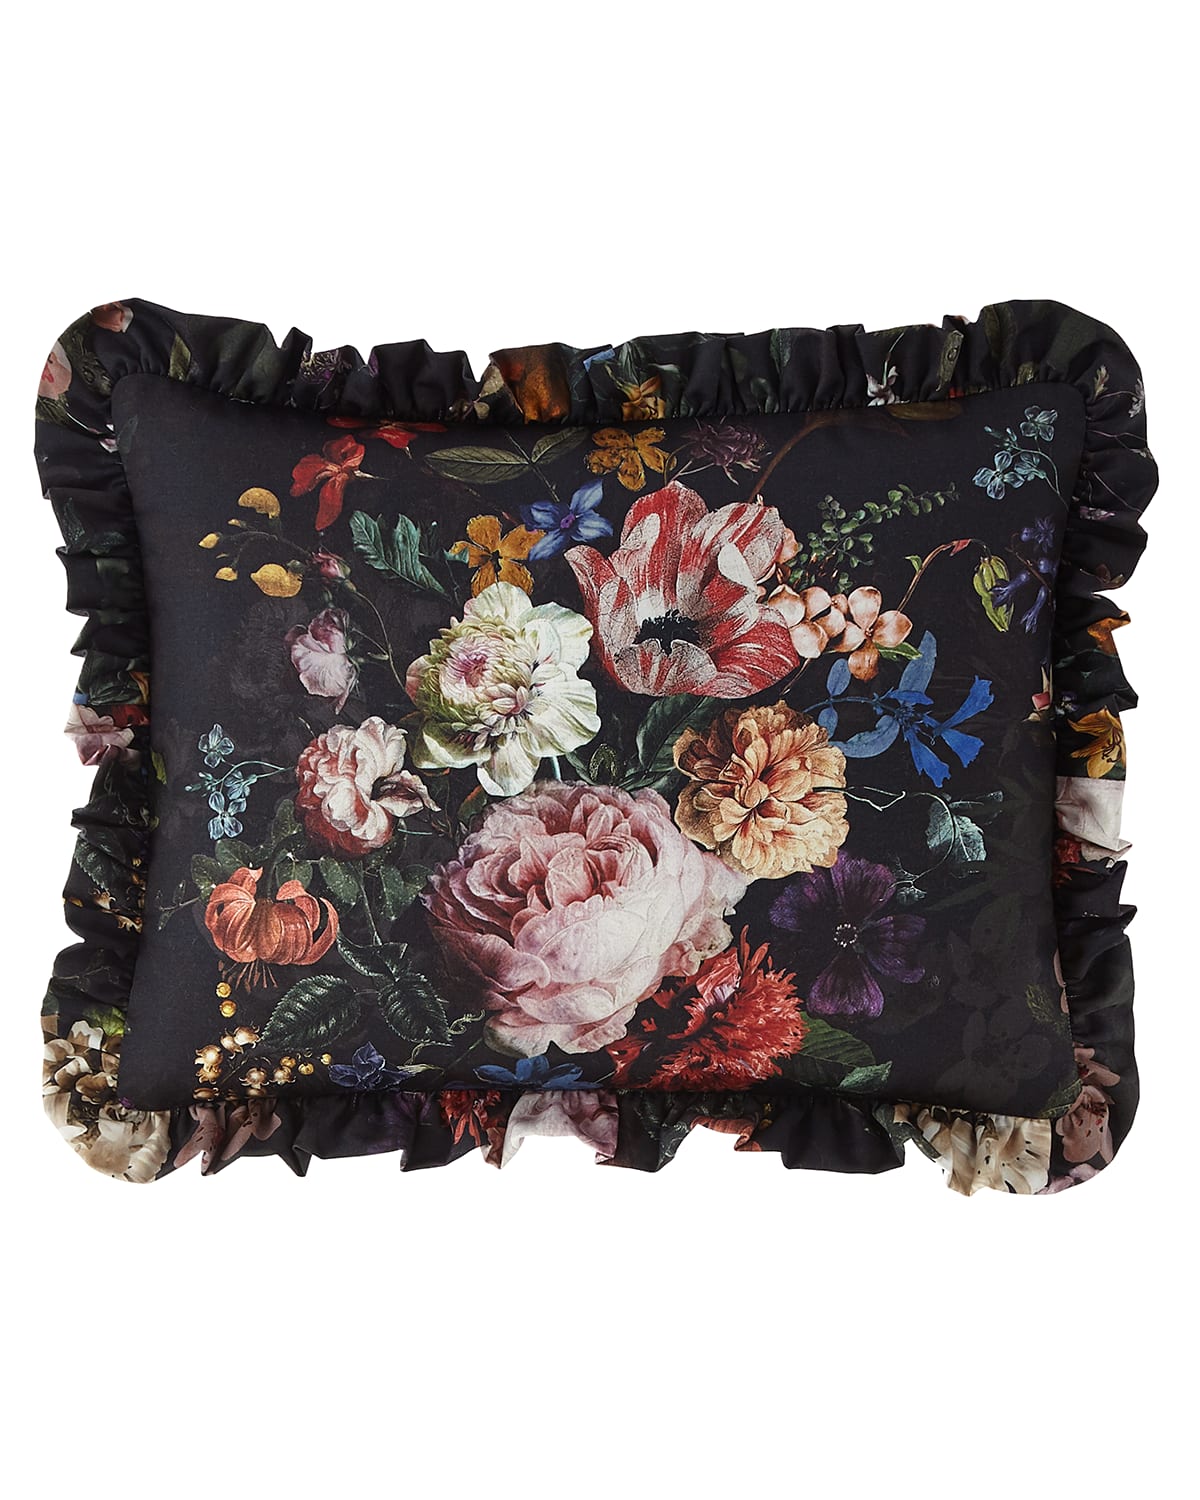 Image Sweet Dreams Midnight Garden Floral Pillow